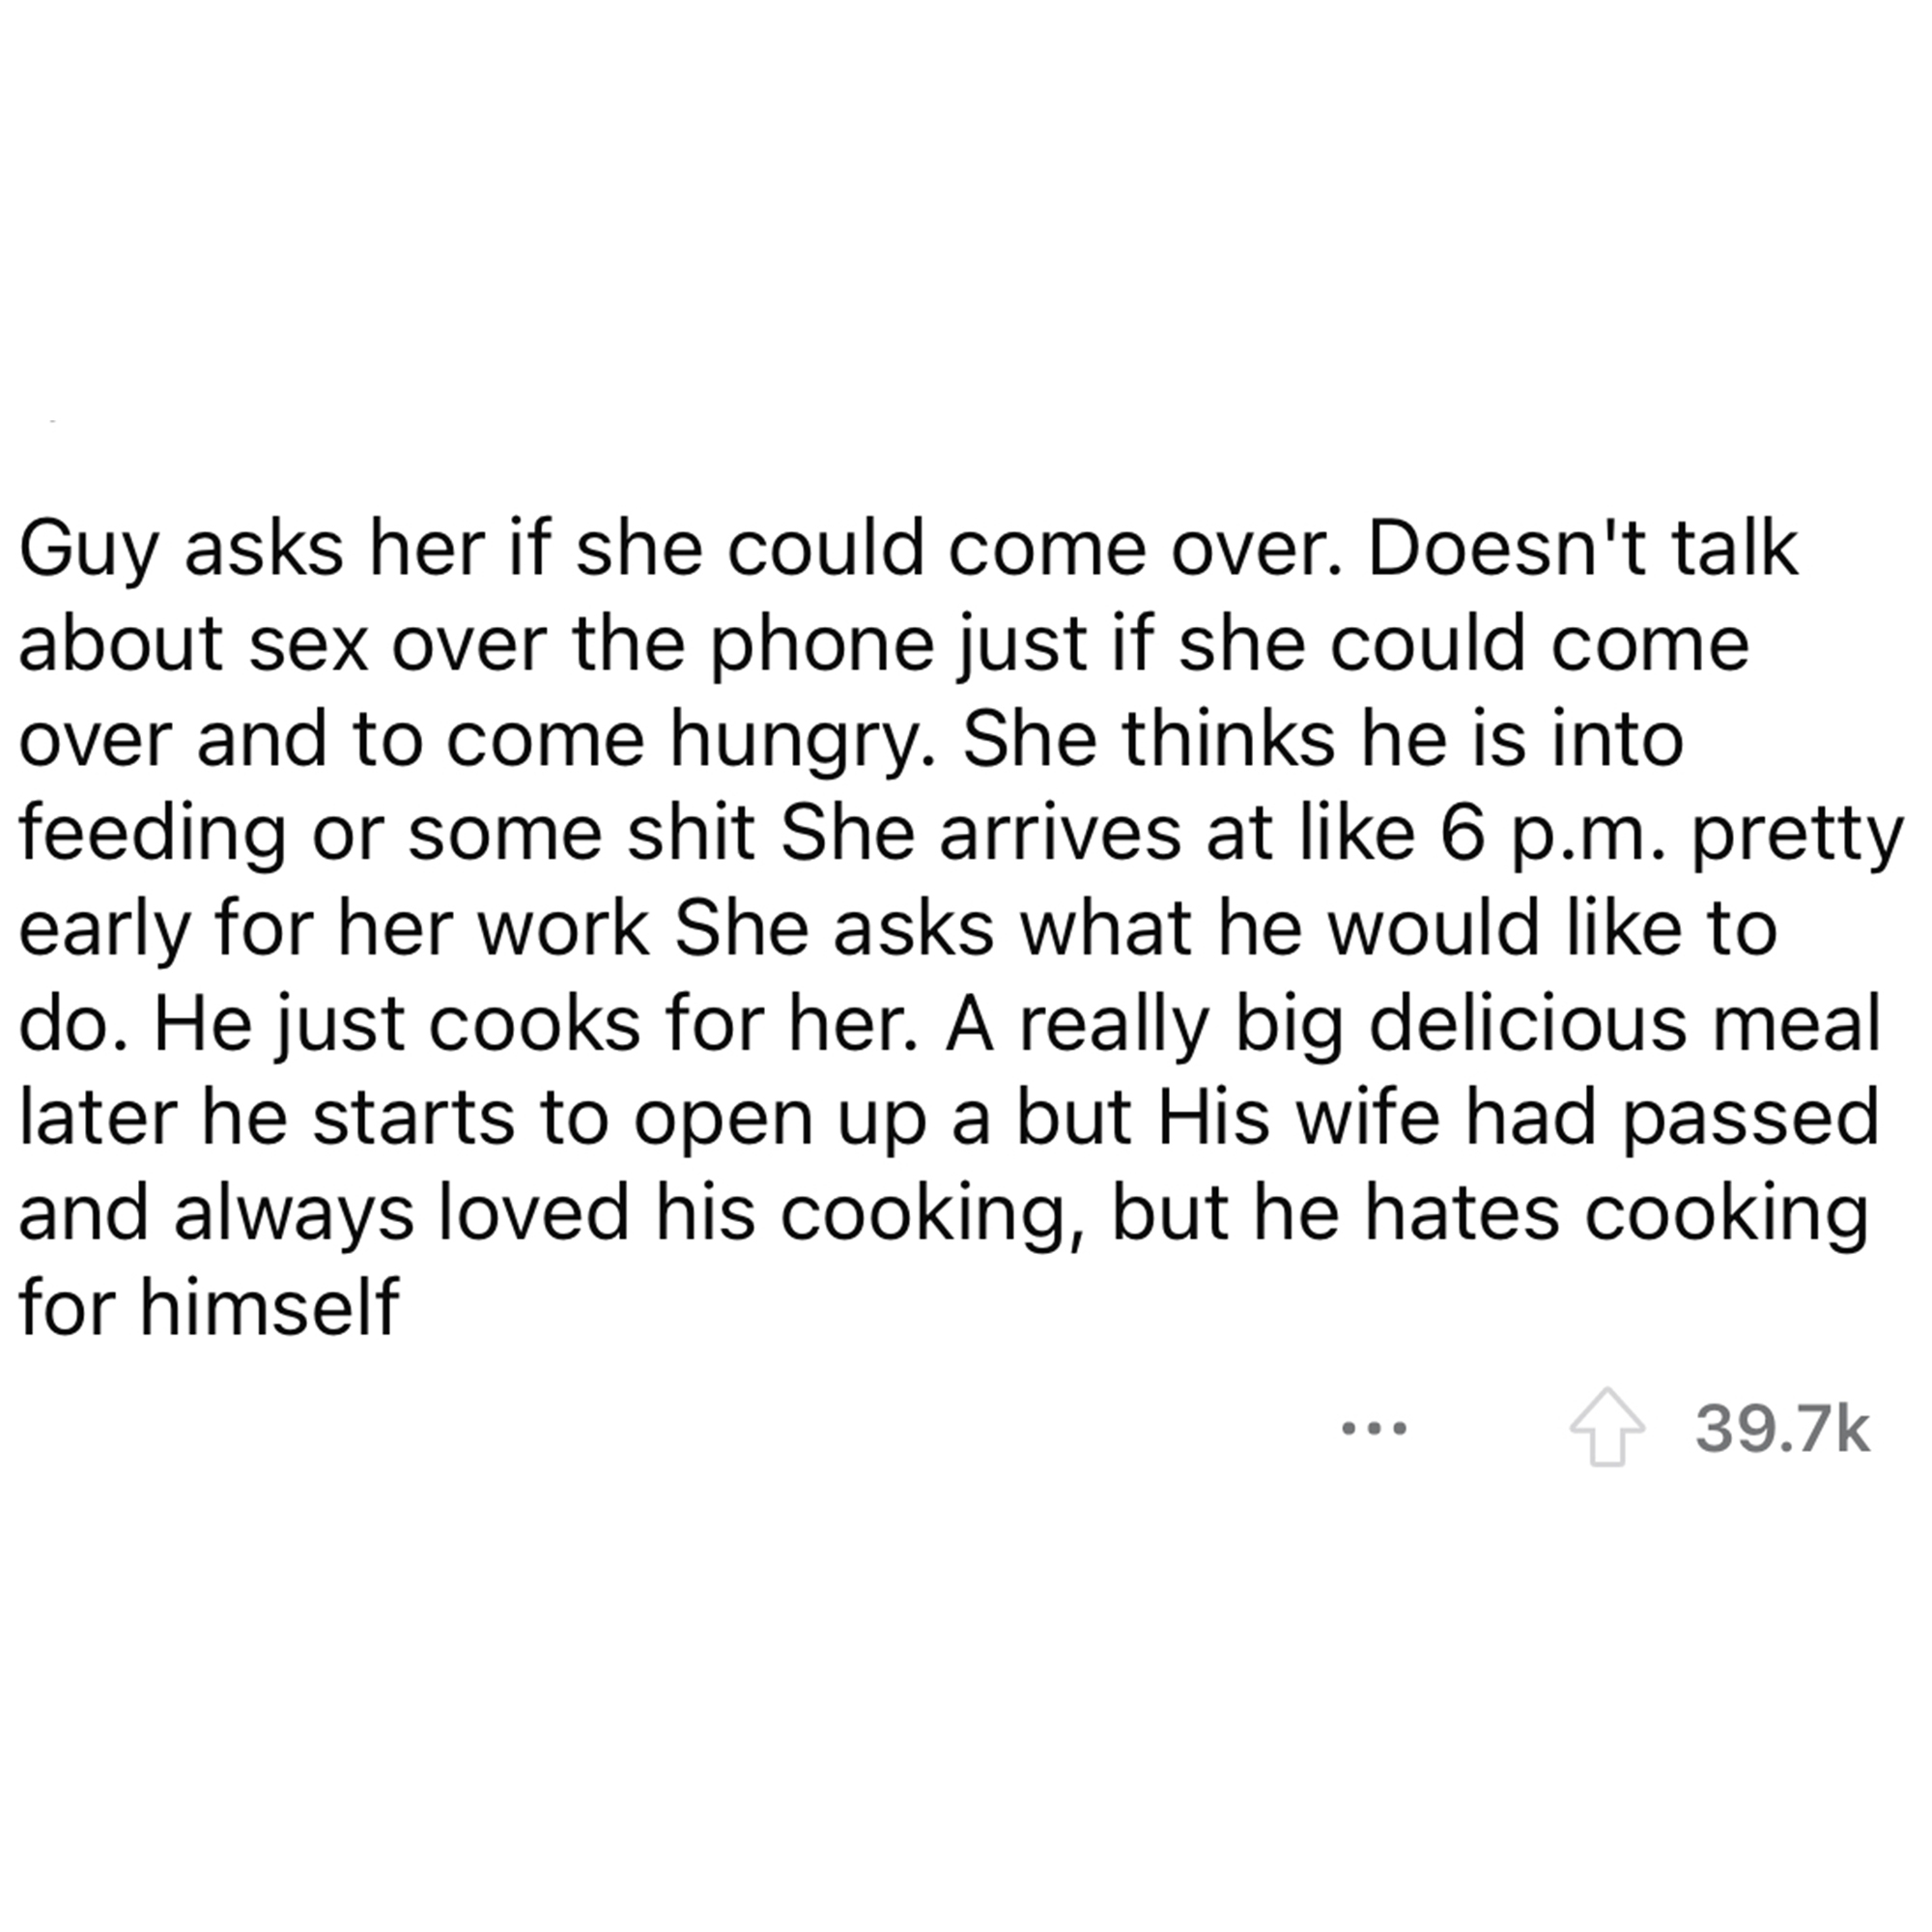 Reddit thread, Man cooks for escort - document - Guy asks her if she could come over. Doesn't talk about sex over the phone just if she could come over and to come hungry. She thinks he is into feeding or some shit She arrives at 6 p.m. pretty early for h